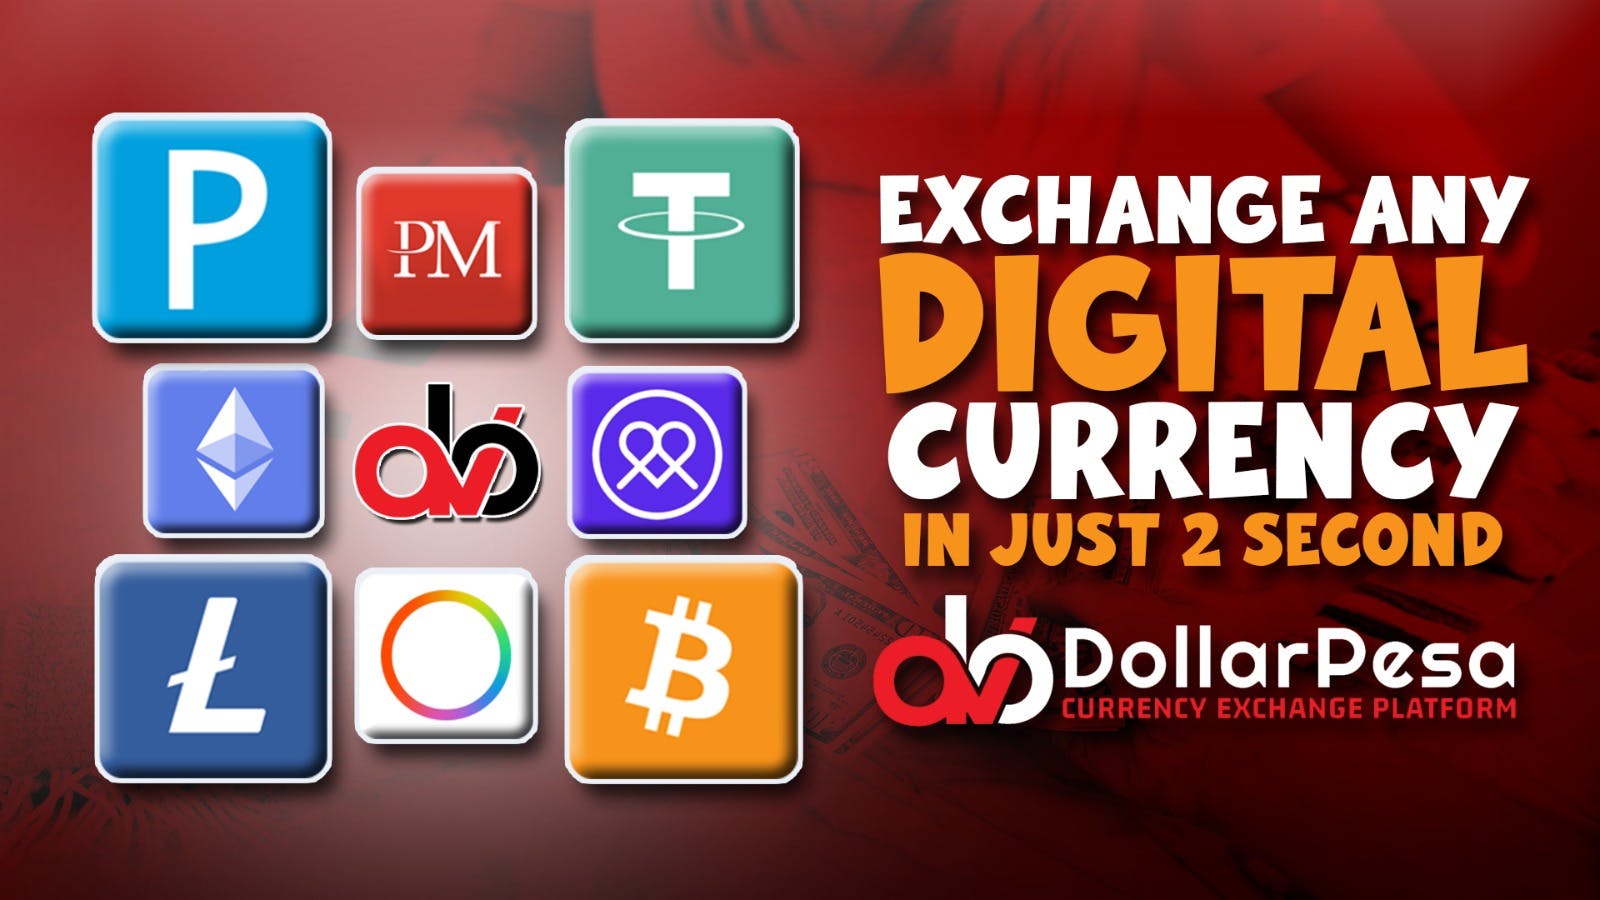 exchange any digital currency in just 2 second seconds